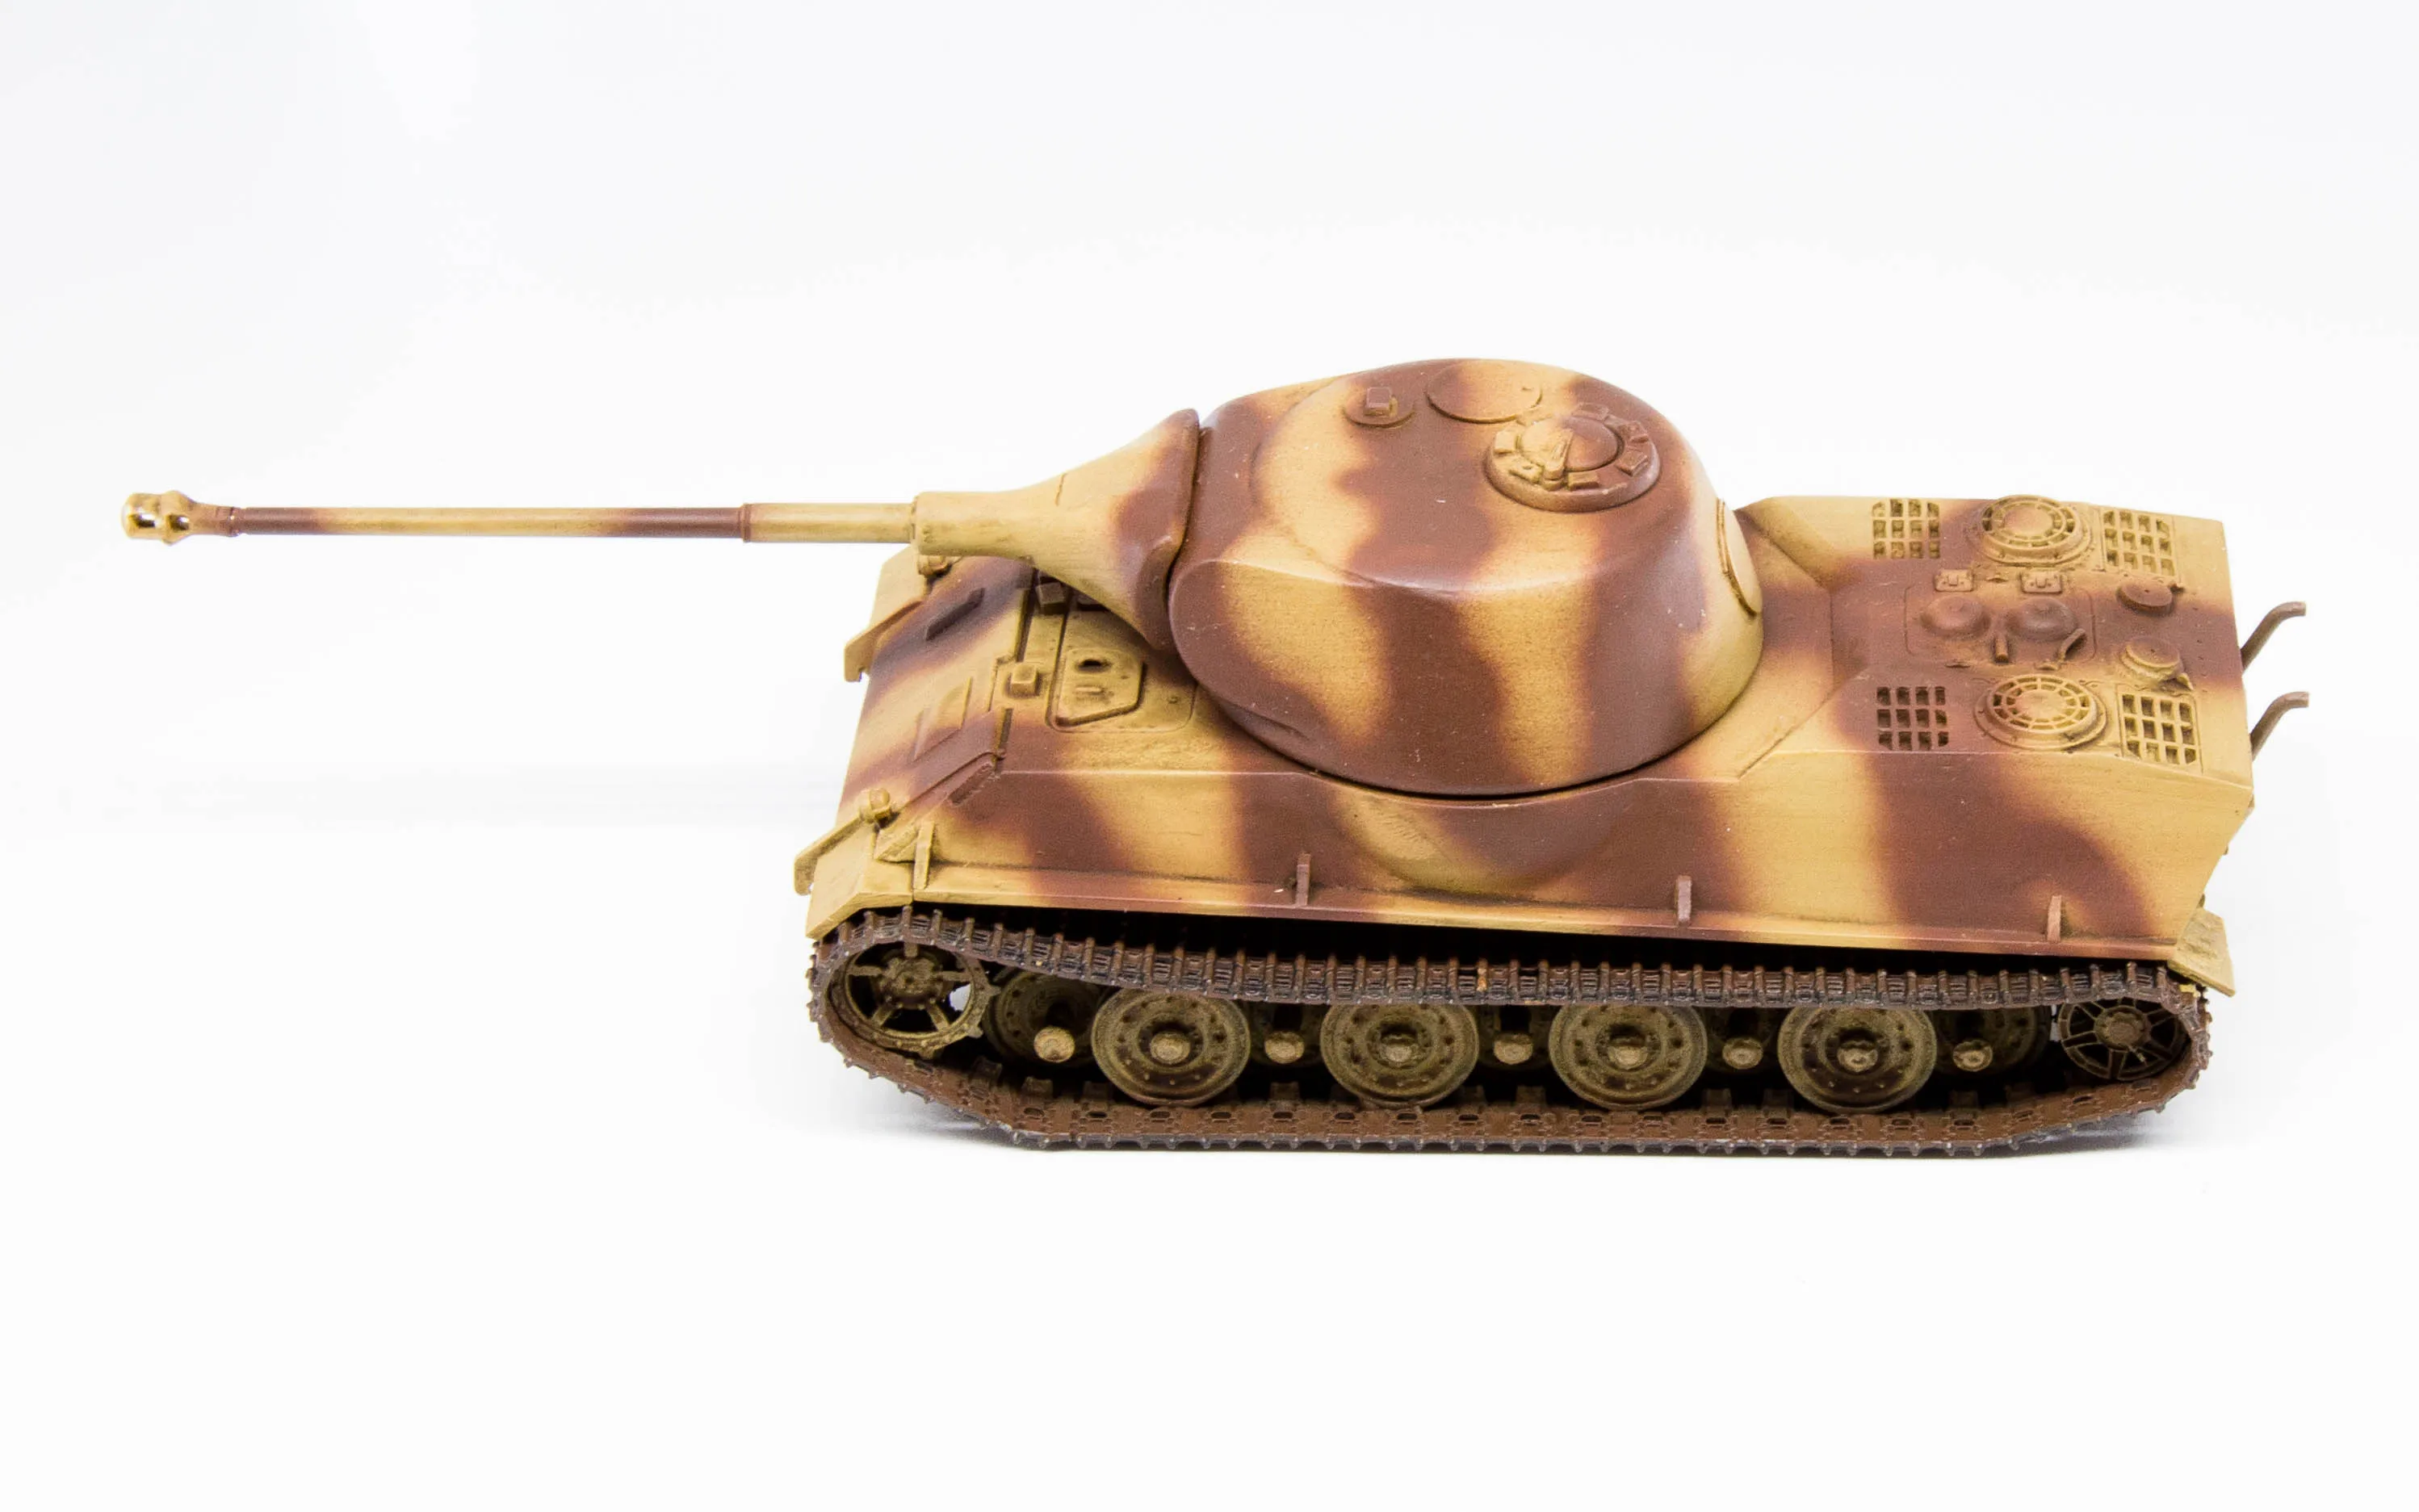 1/72 German LOWE PANZER VII Tank Finished Model by 5M Hobby #WOT #World of Tanks 